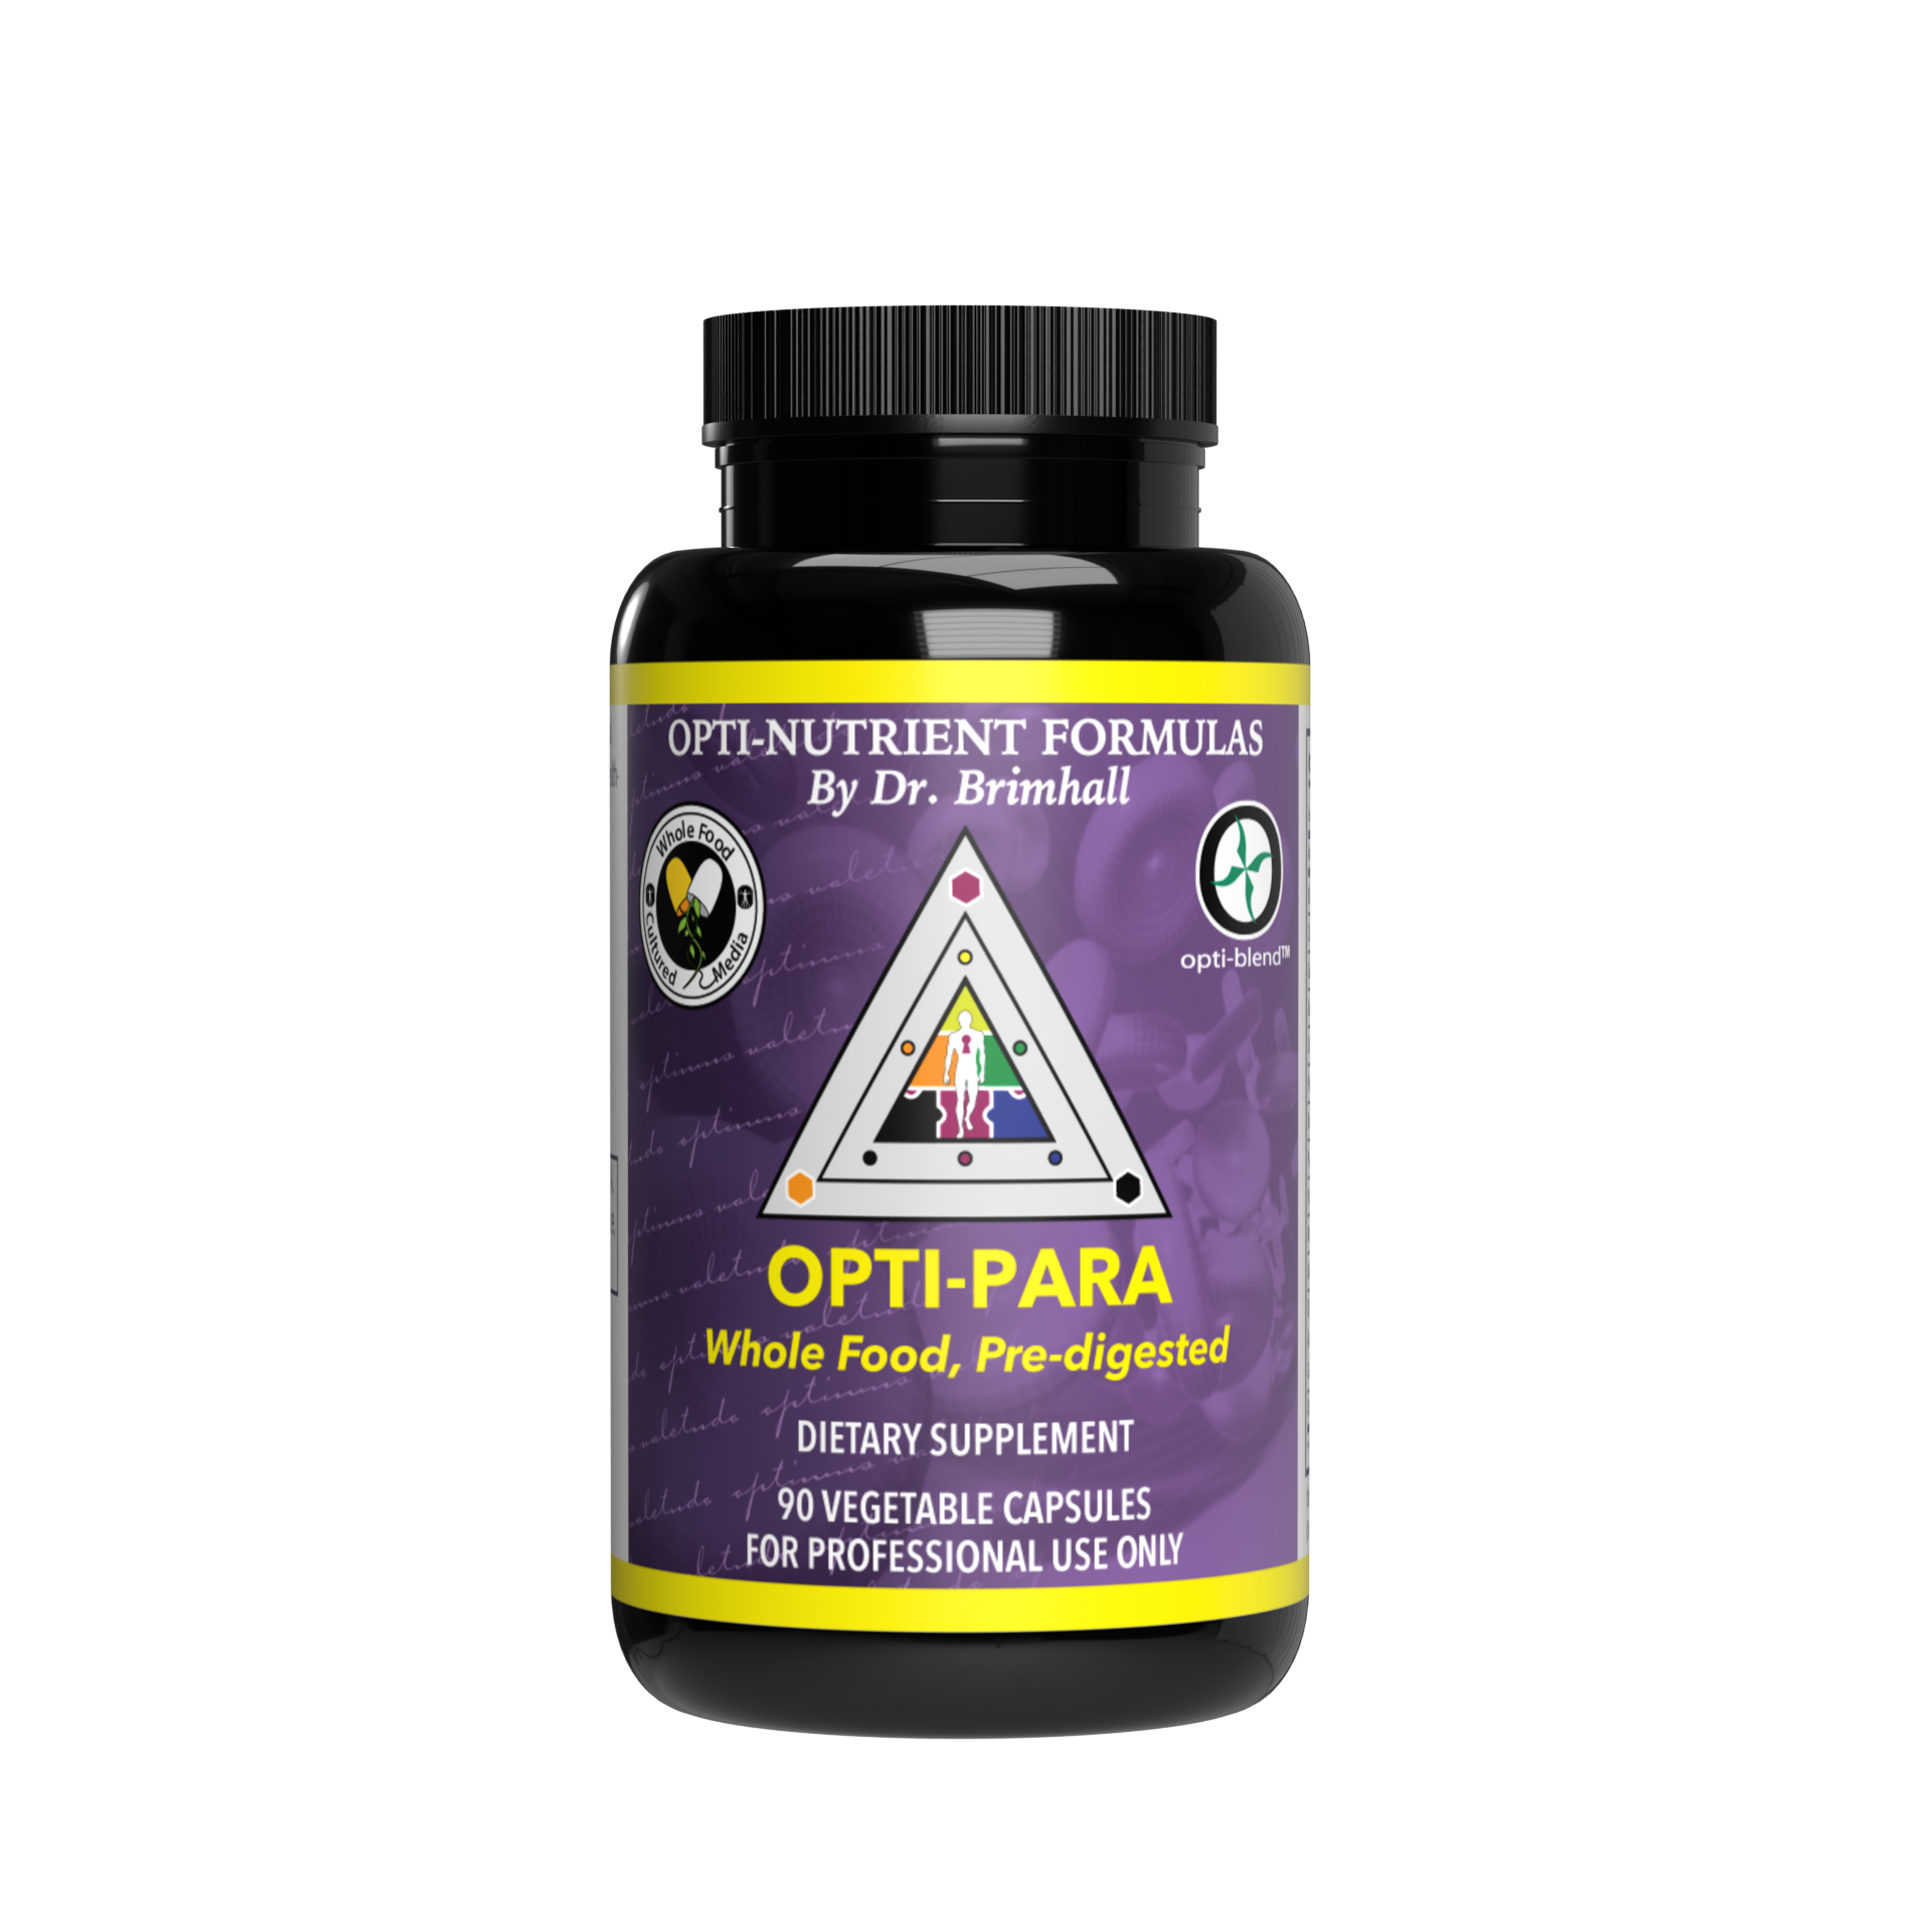 Image of a bottle of Opti-Nutrients Opti-Para.